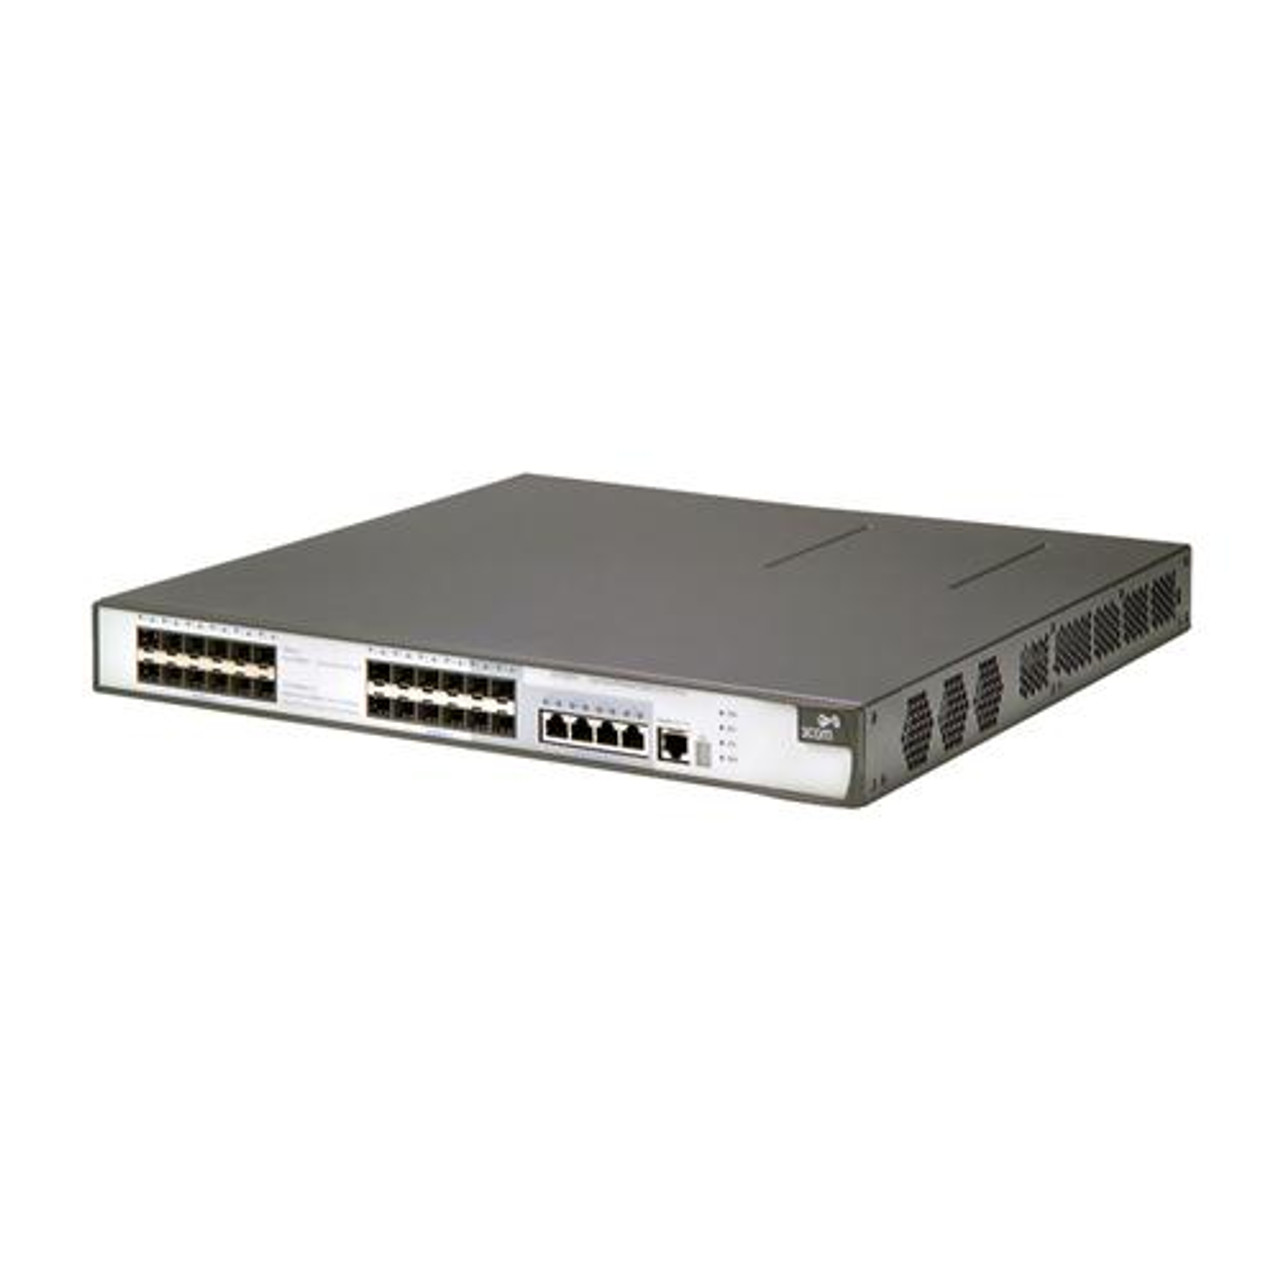 JE096A - HP ProCurve E5500-24G-PoE 24-Ports Layer-3 Managed Stackable Gigabit Ethernet Switch with 4 x SFP (mini-GBIC)